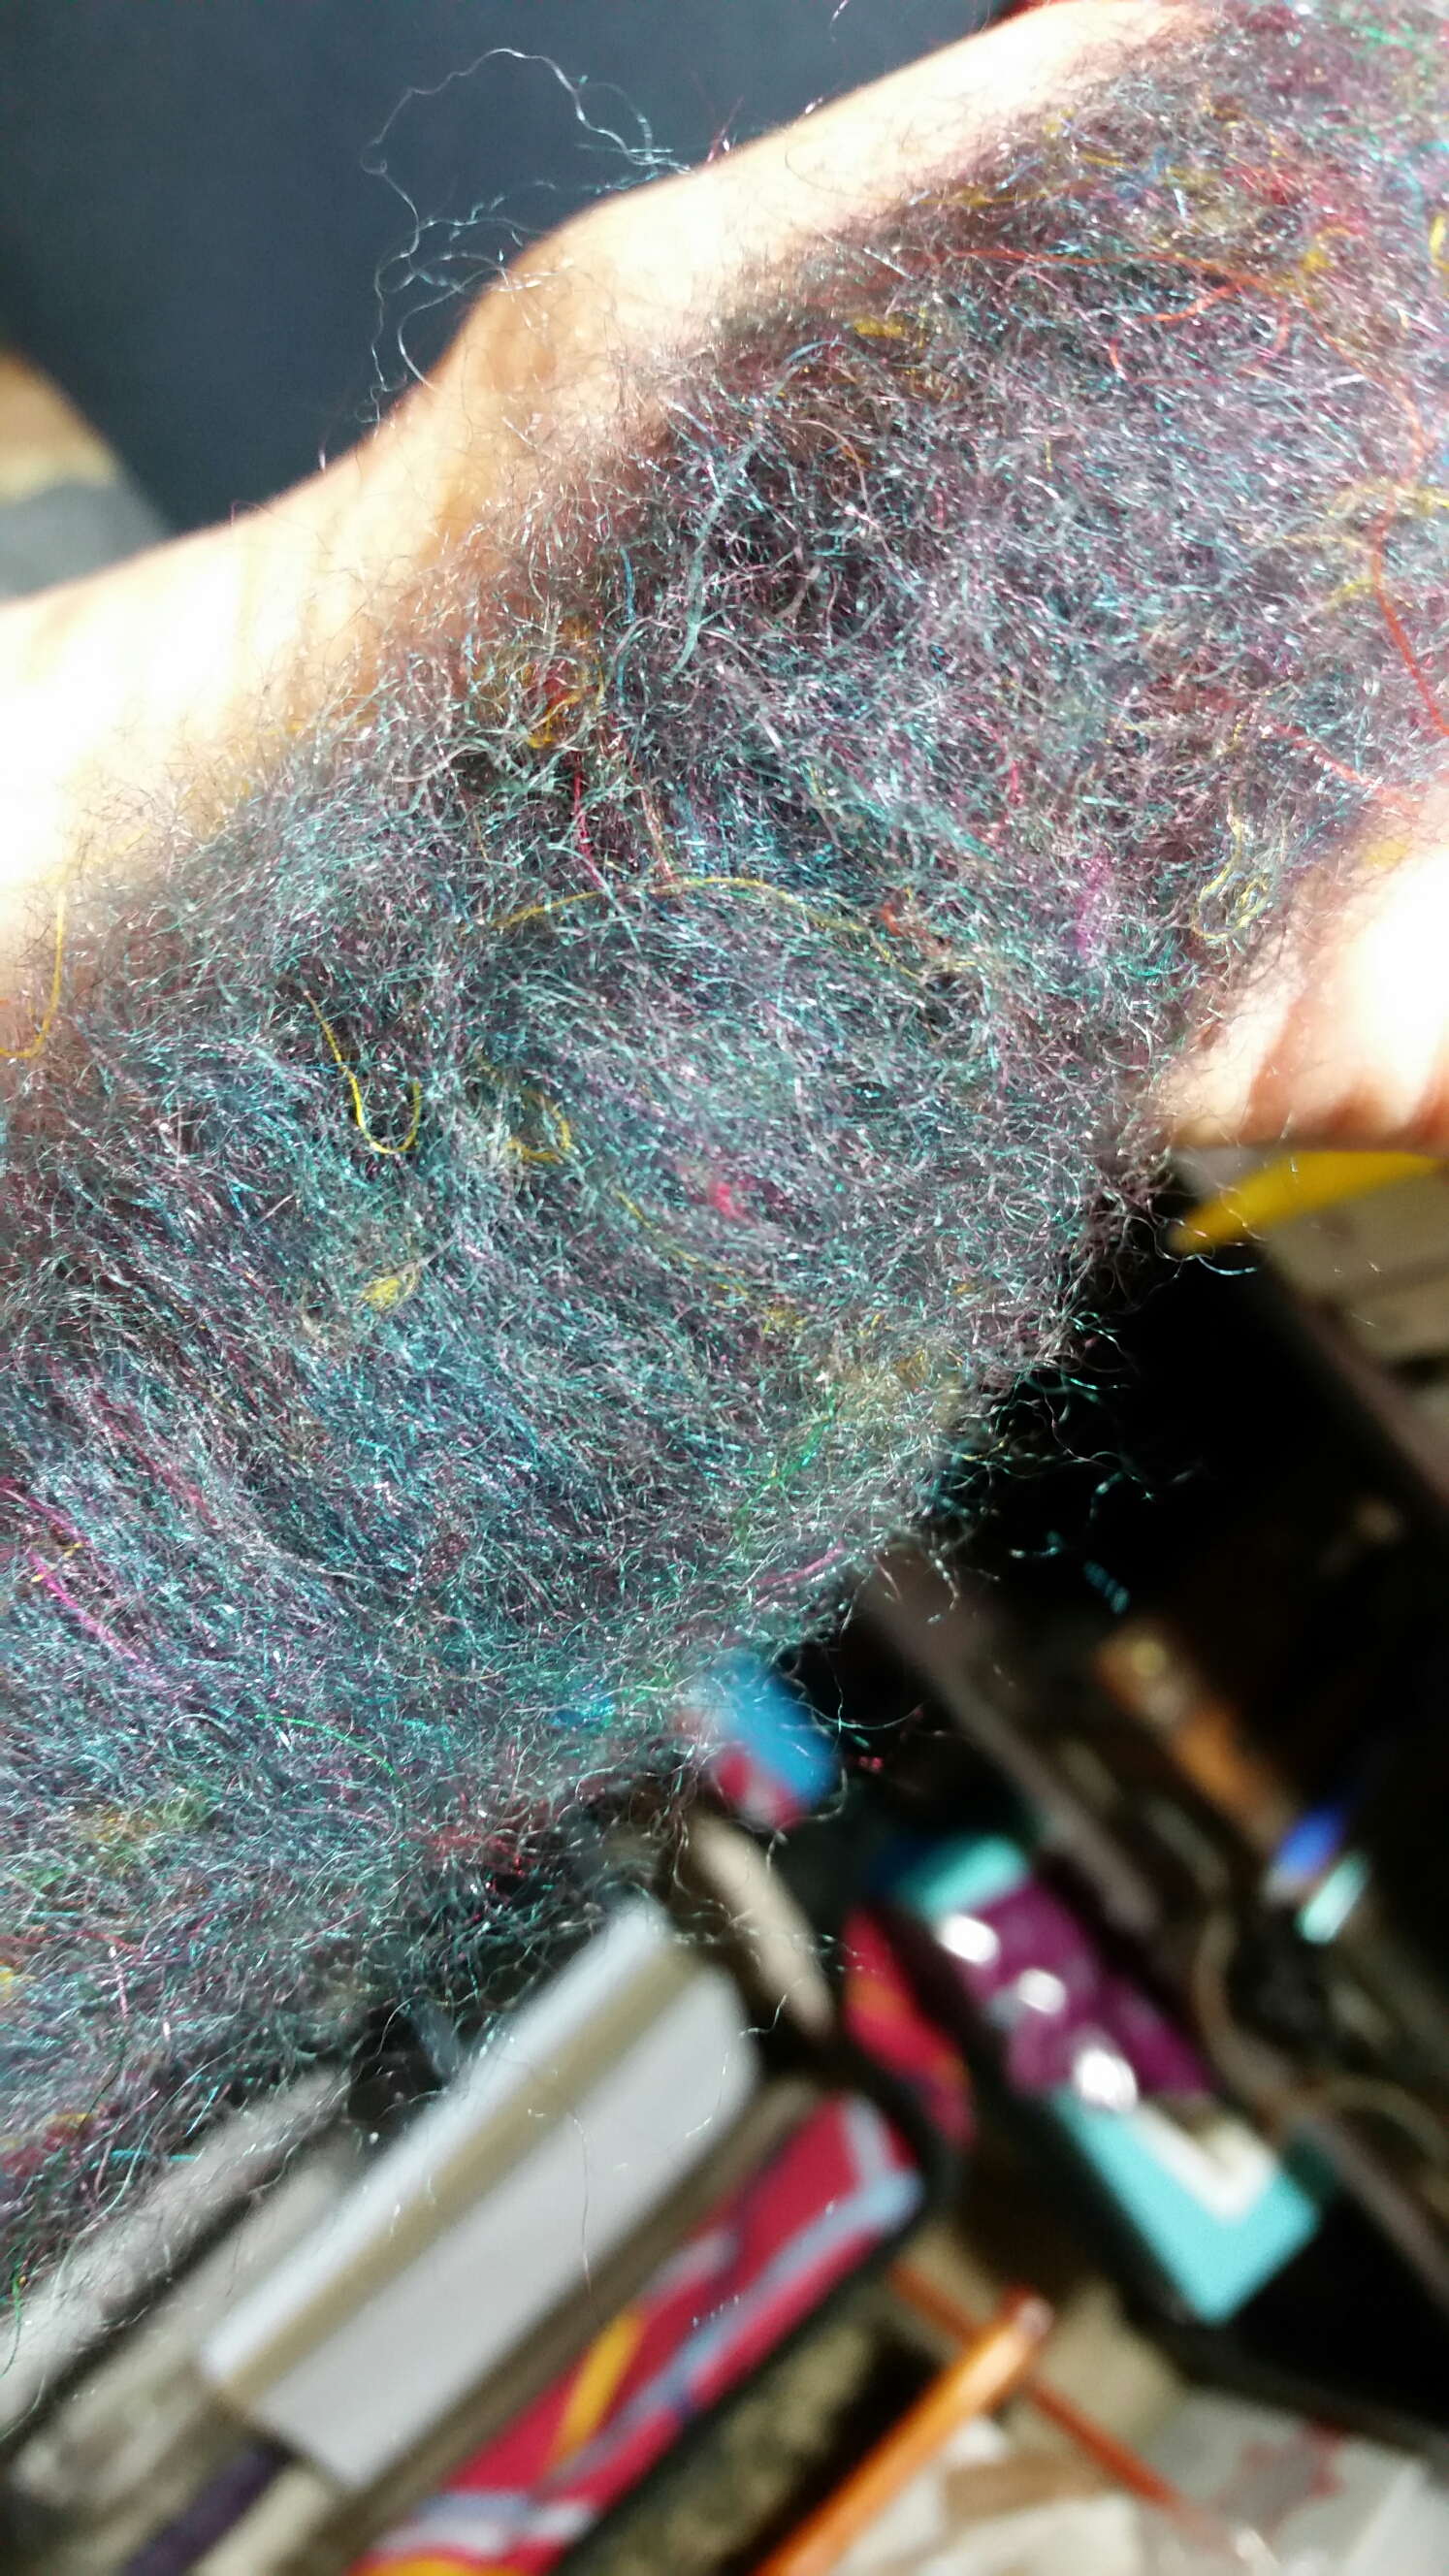 Rolag of hand-carded SGY Riptide and Black Cherry BFL-Silk Blend, with sari silk fibers included.